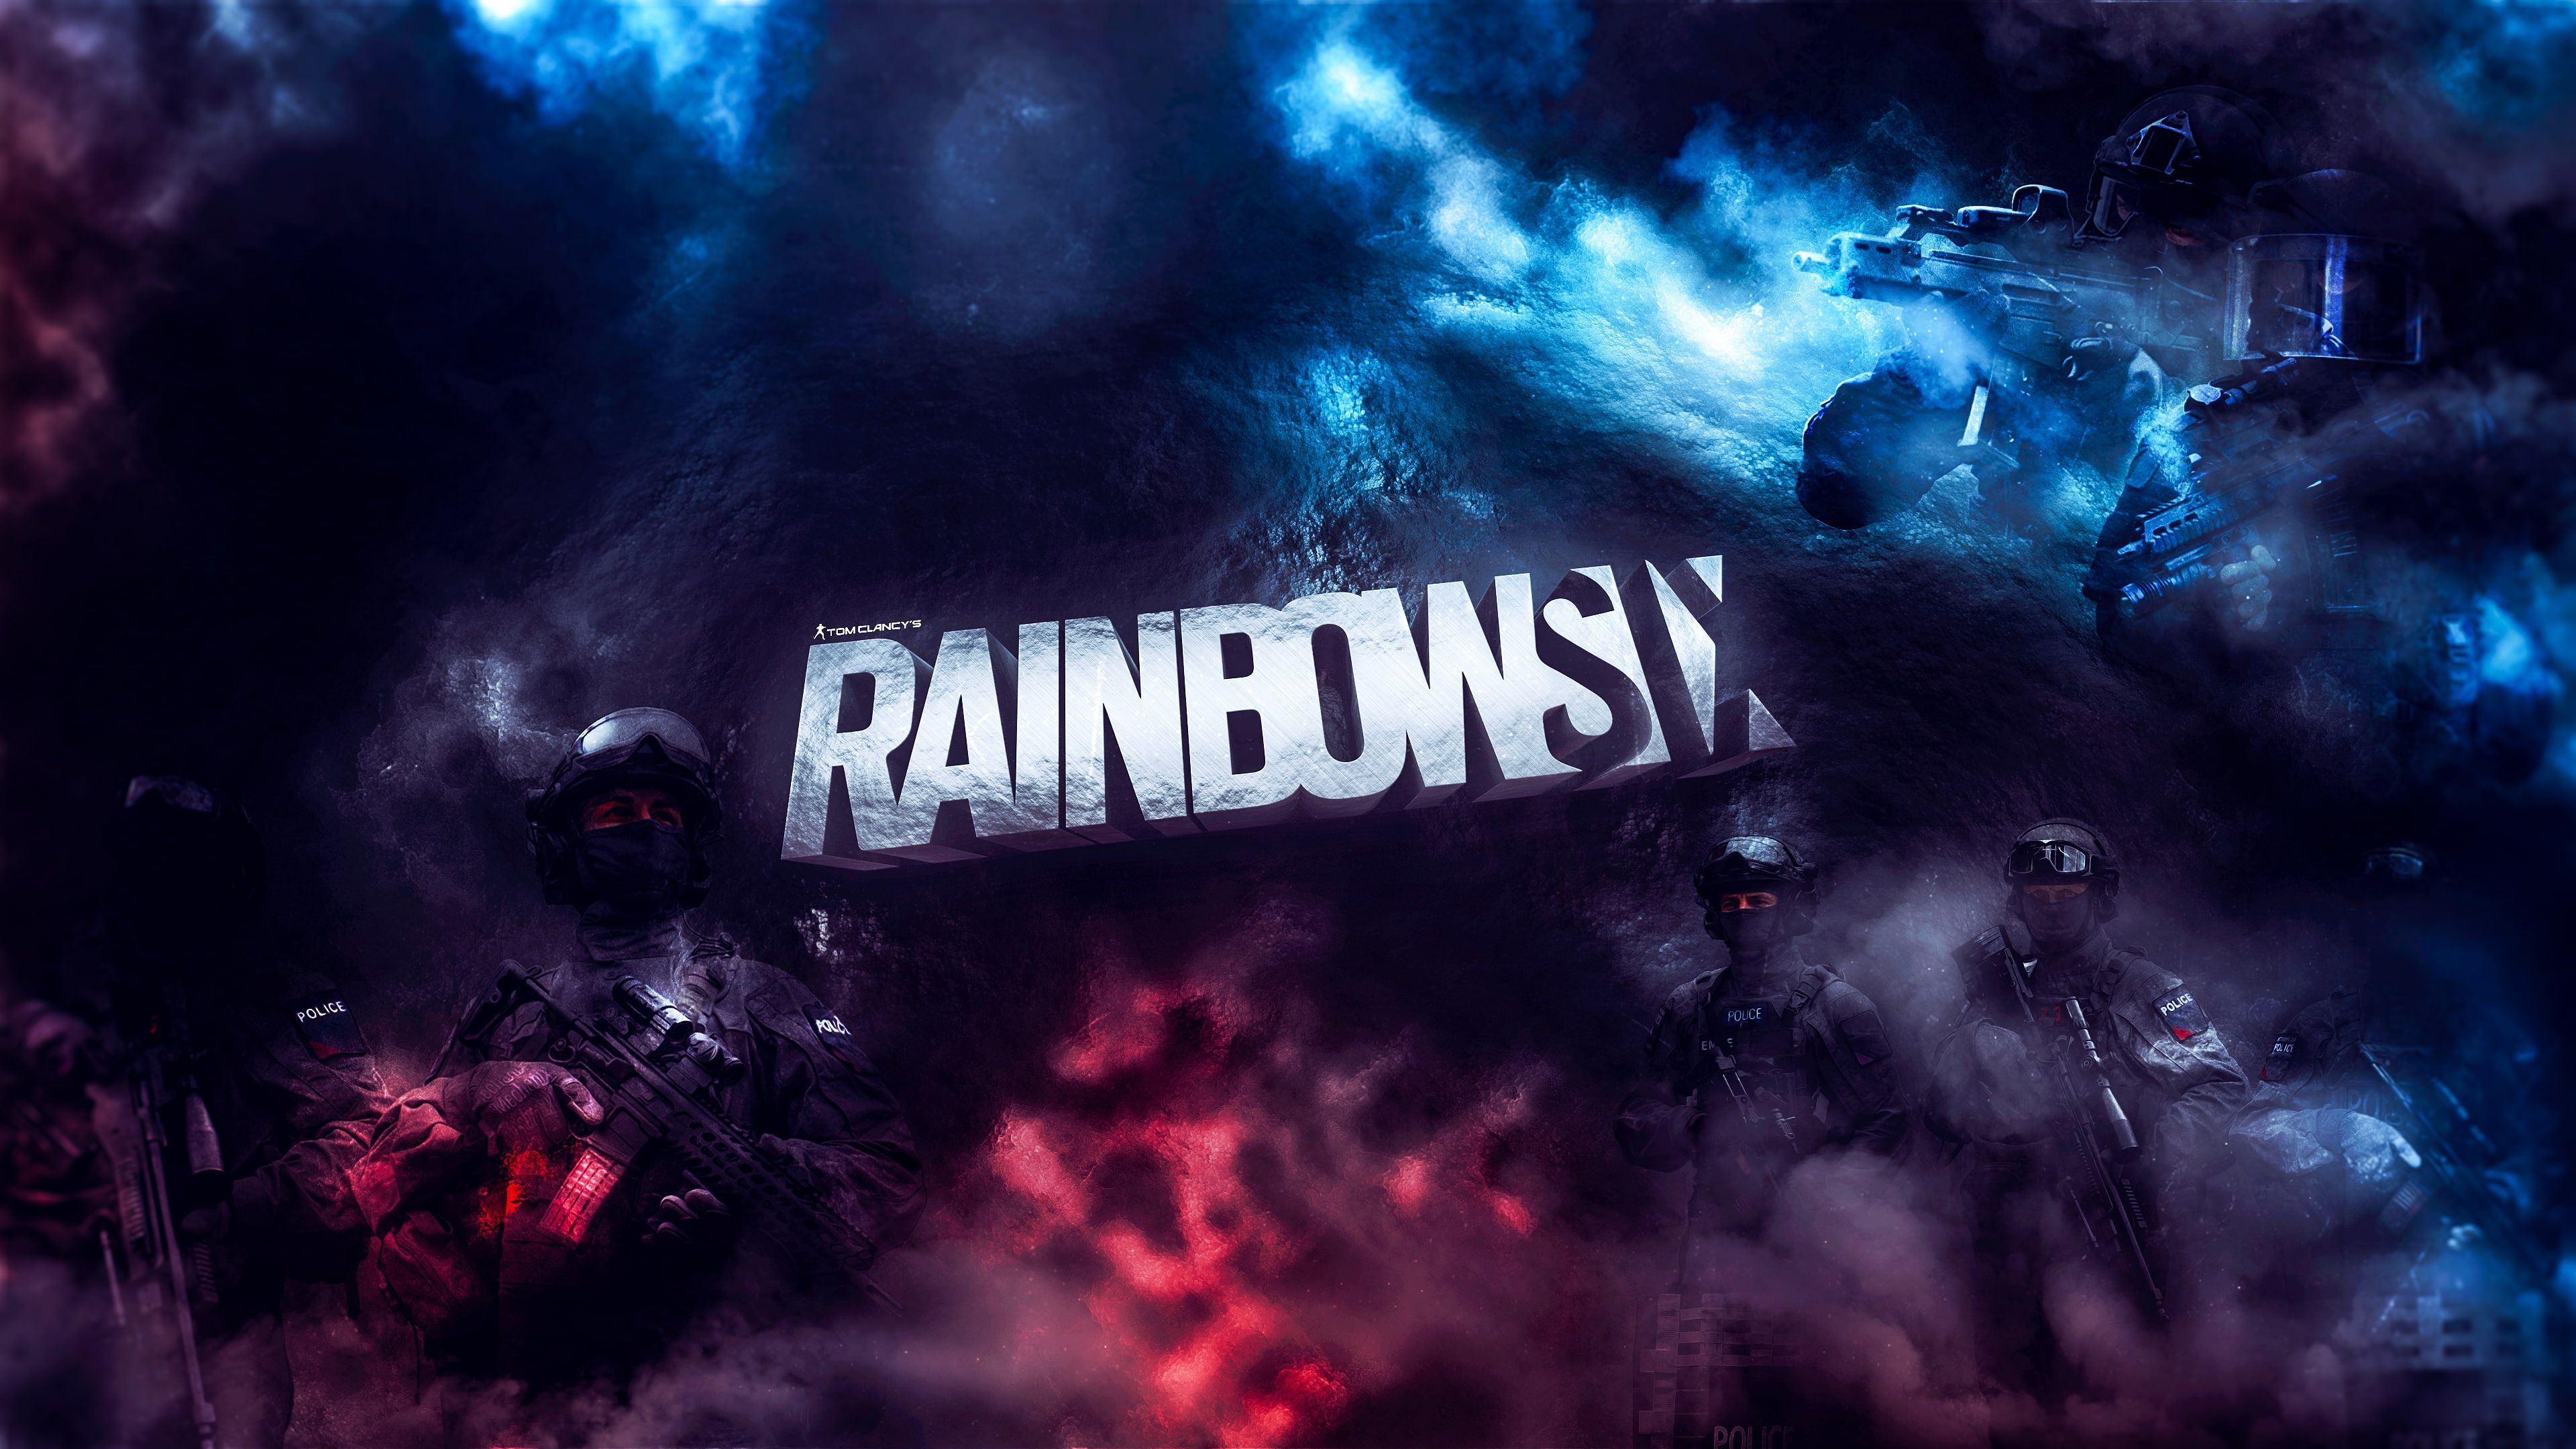 Rainbow 6: Siege video games Games posters games art game logo